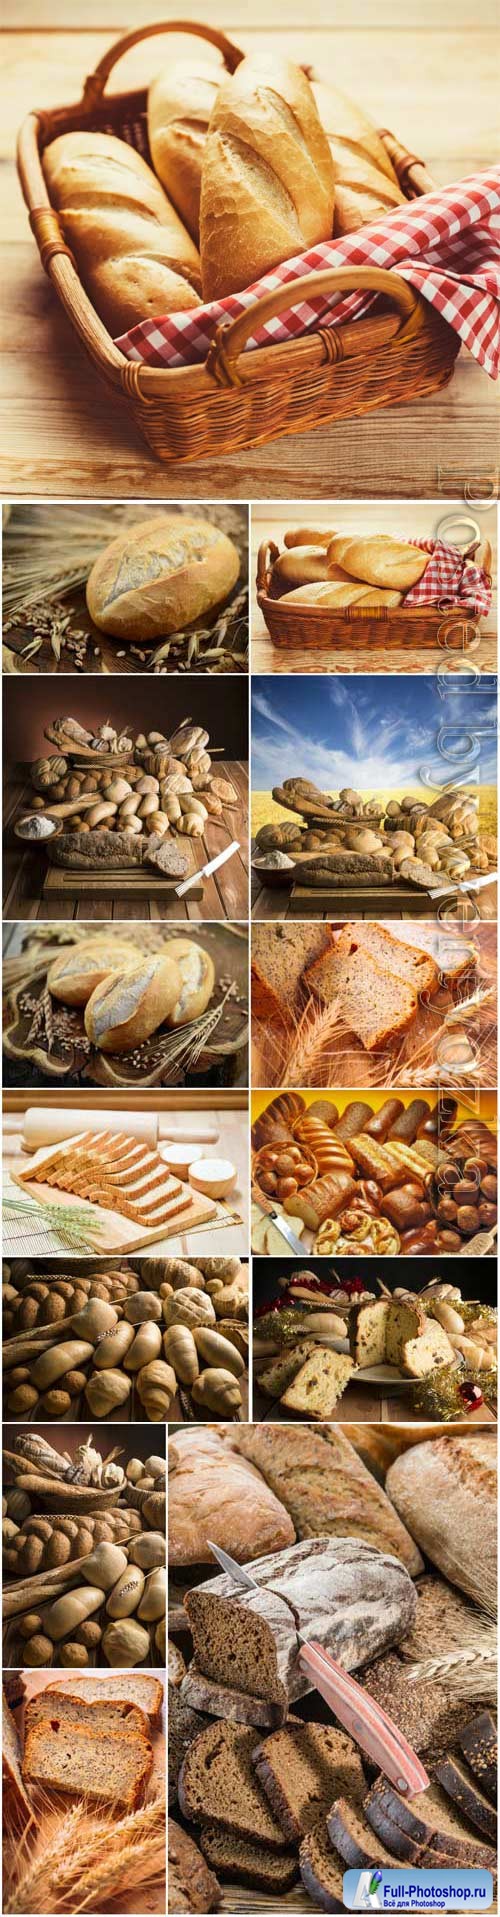 Baskets with fresh bread stock photo